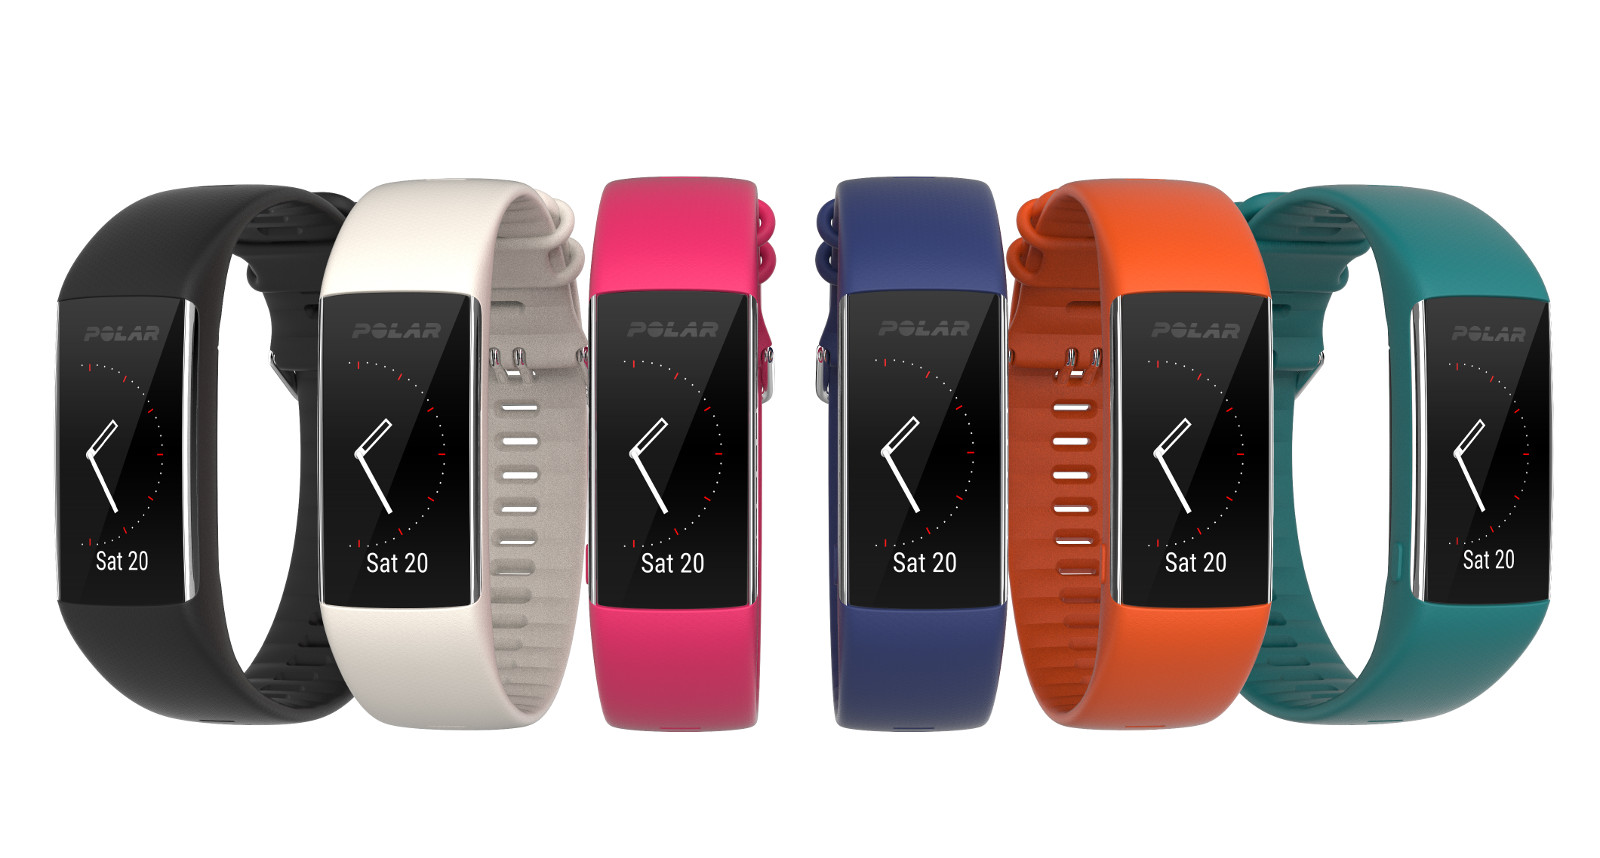 Polar's new fitness tracker constantly monitors your heart rate